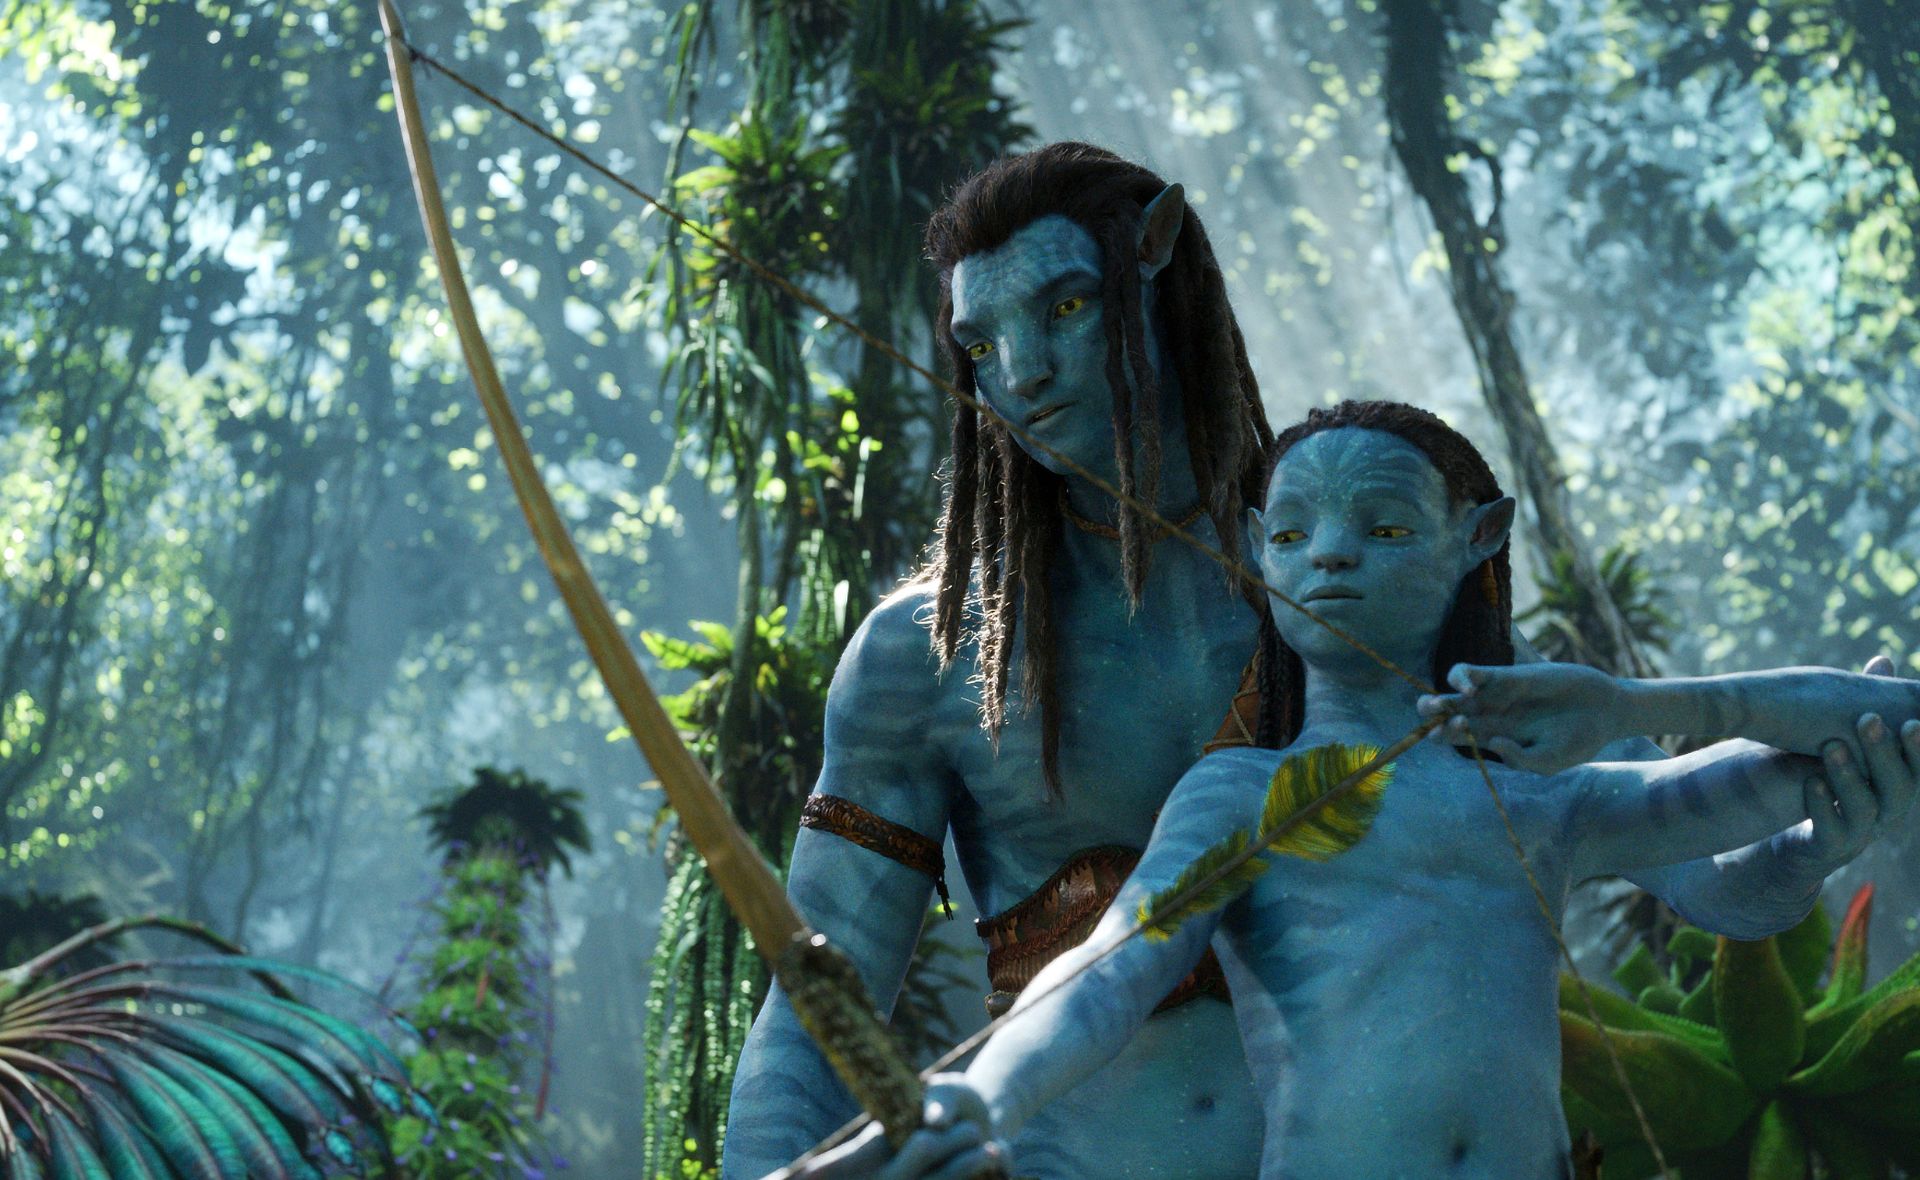 EXCLUSIVE: Sam Worthington reveals why James Cameron wanted Lara and his kids on the Avatar 2 set